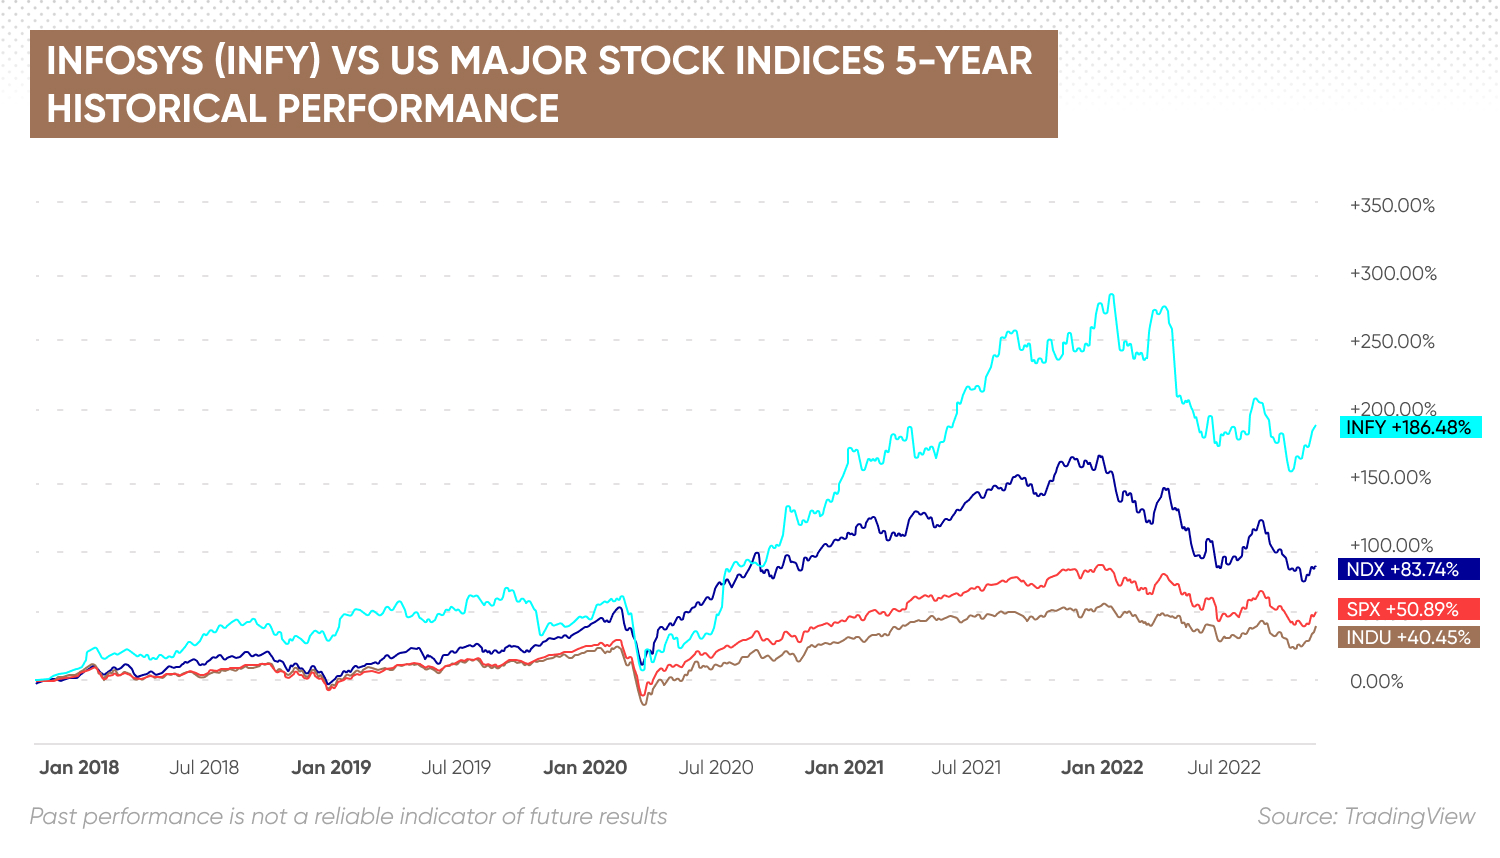 Infosys (INFY) vs US major stock indices 5-year historical performance